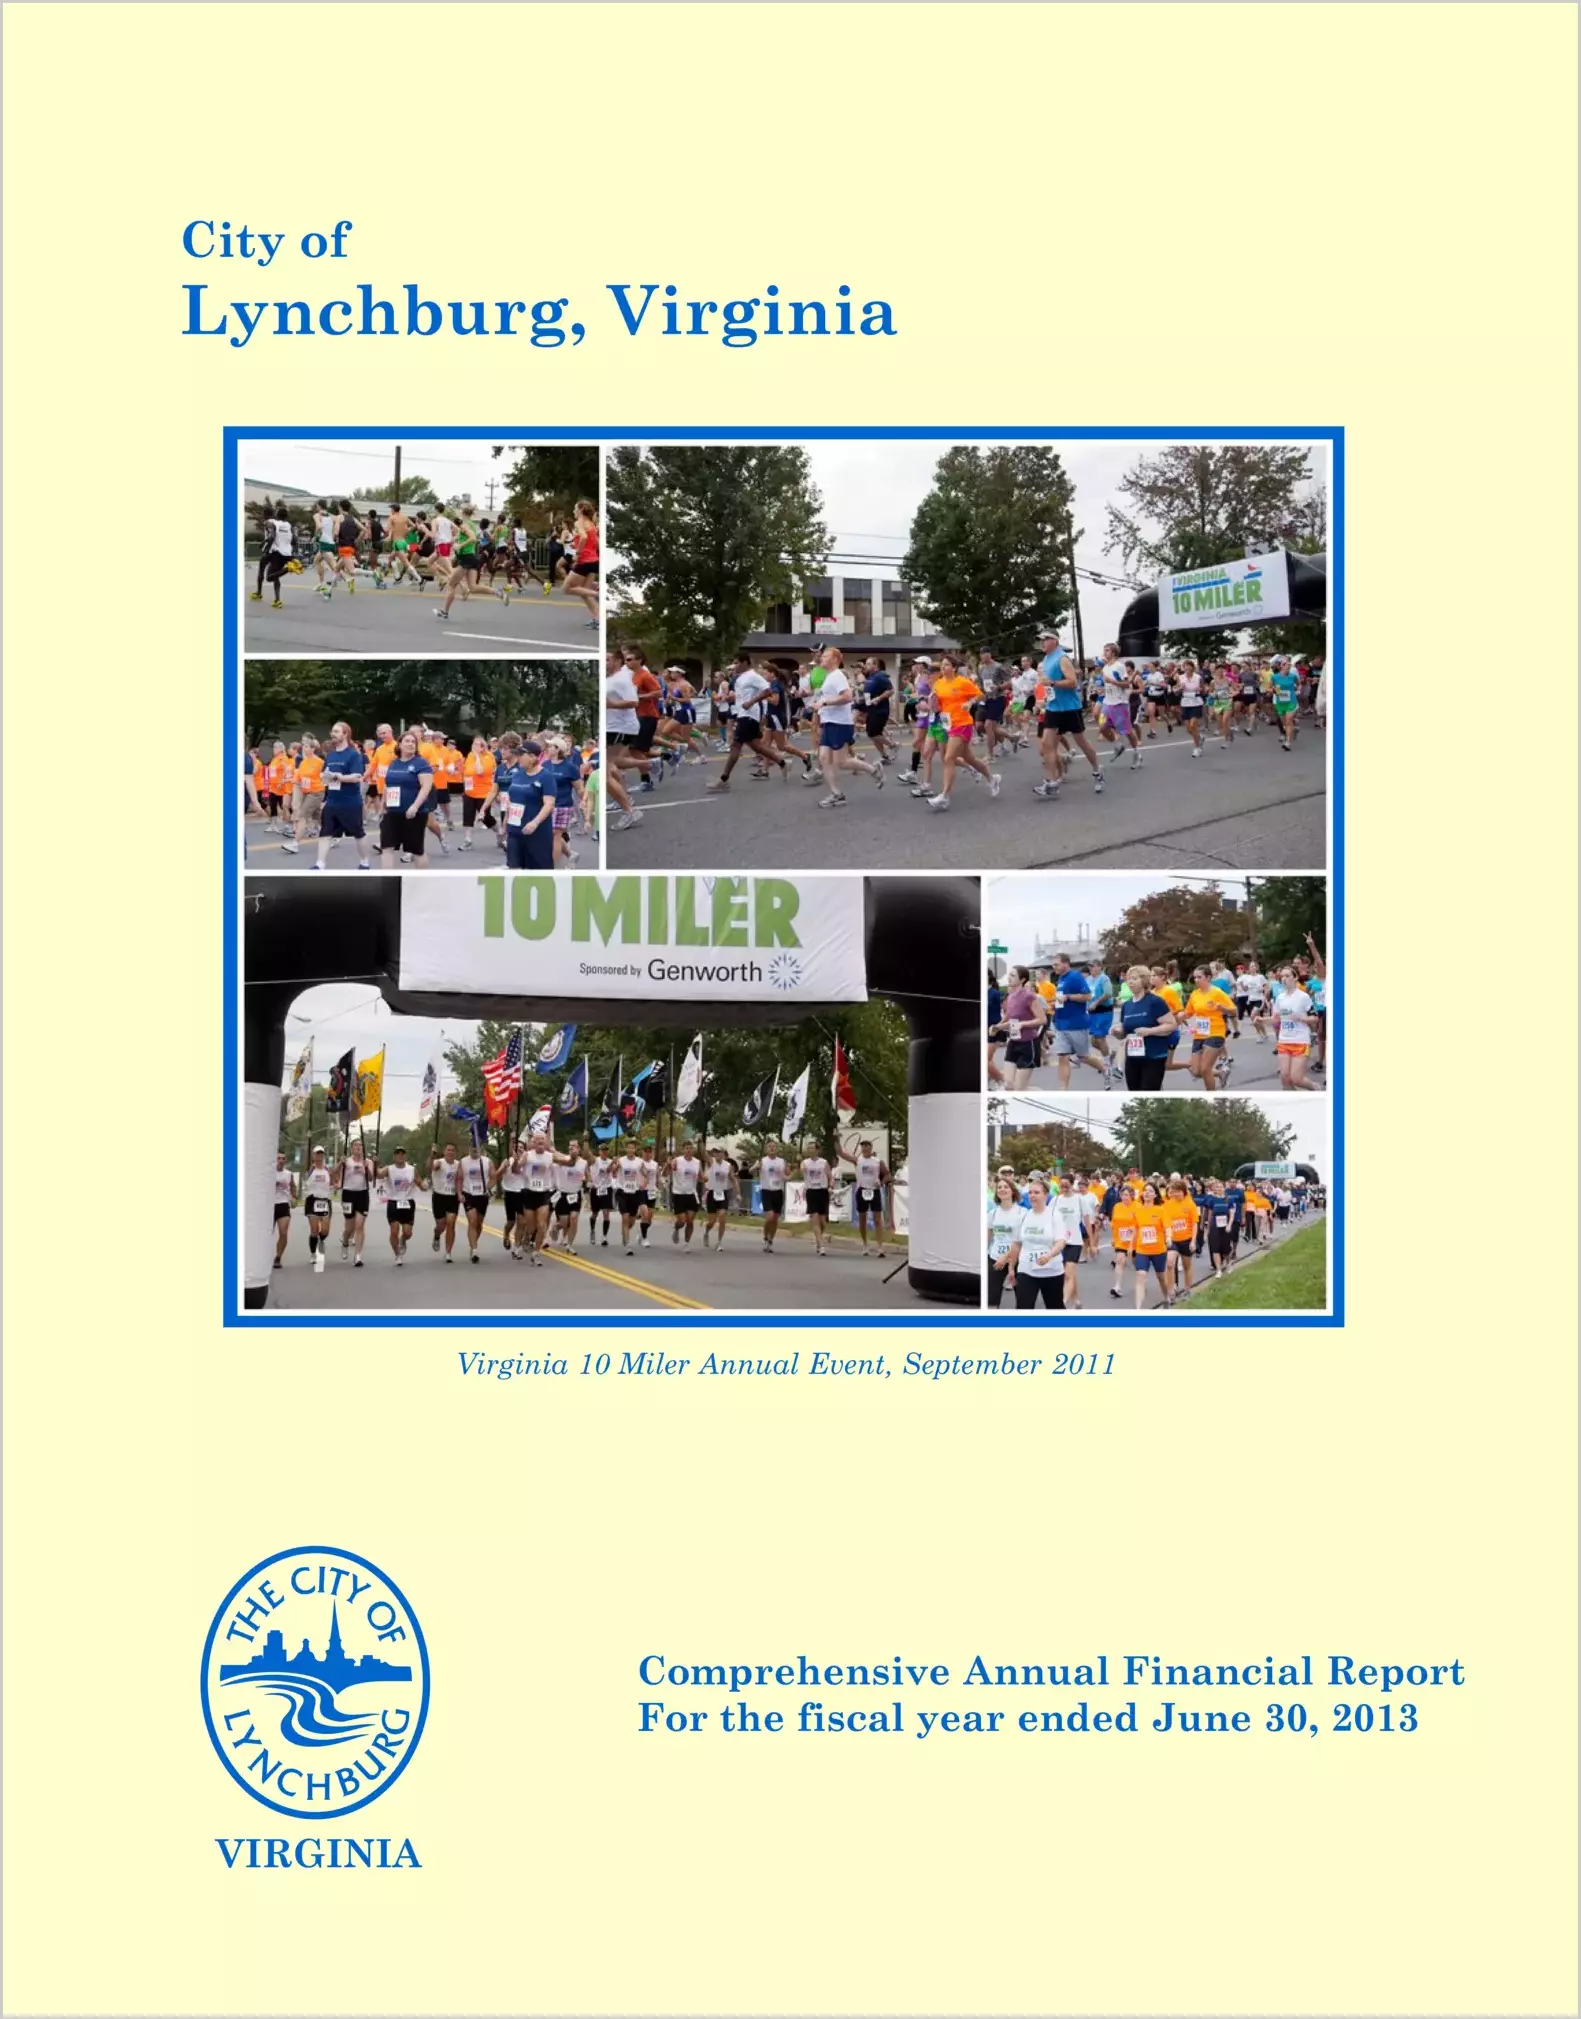 2013 Annual Financial Report for City of Lynchburg